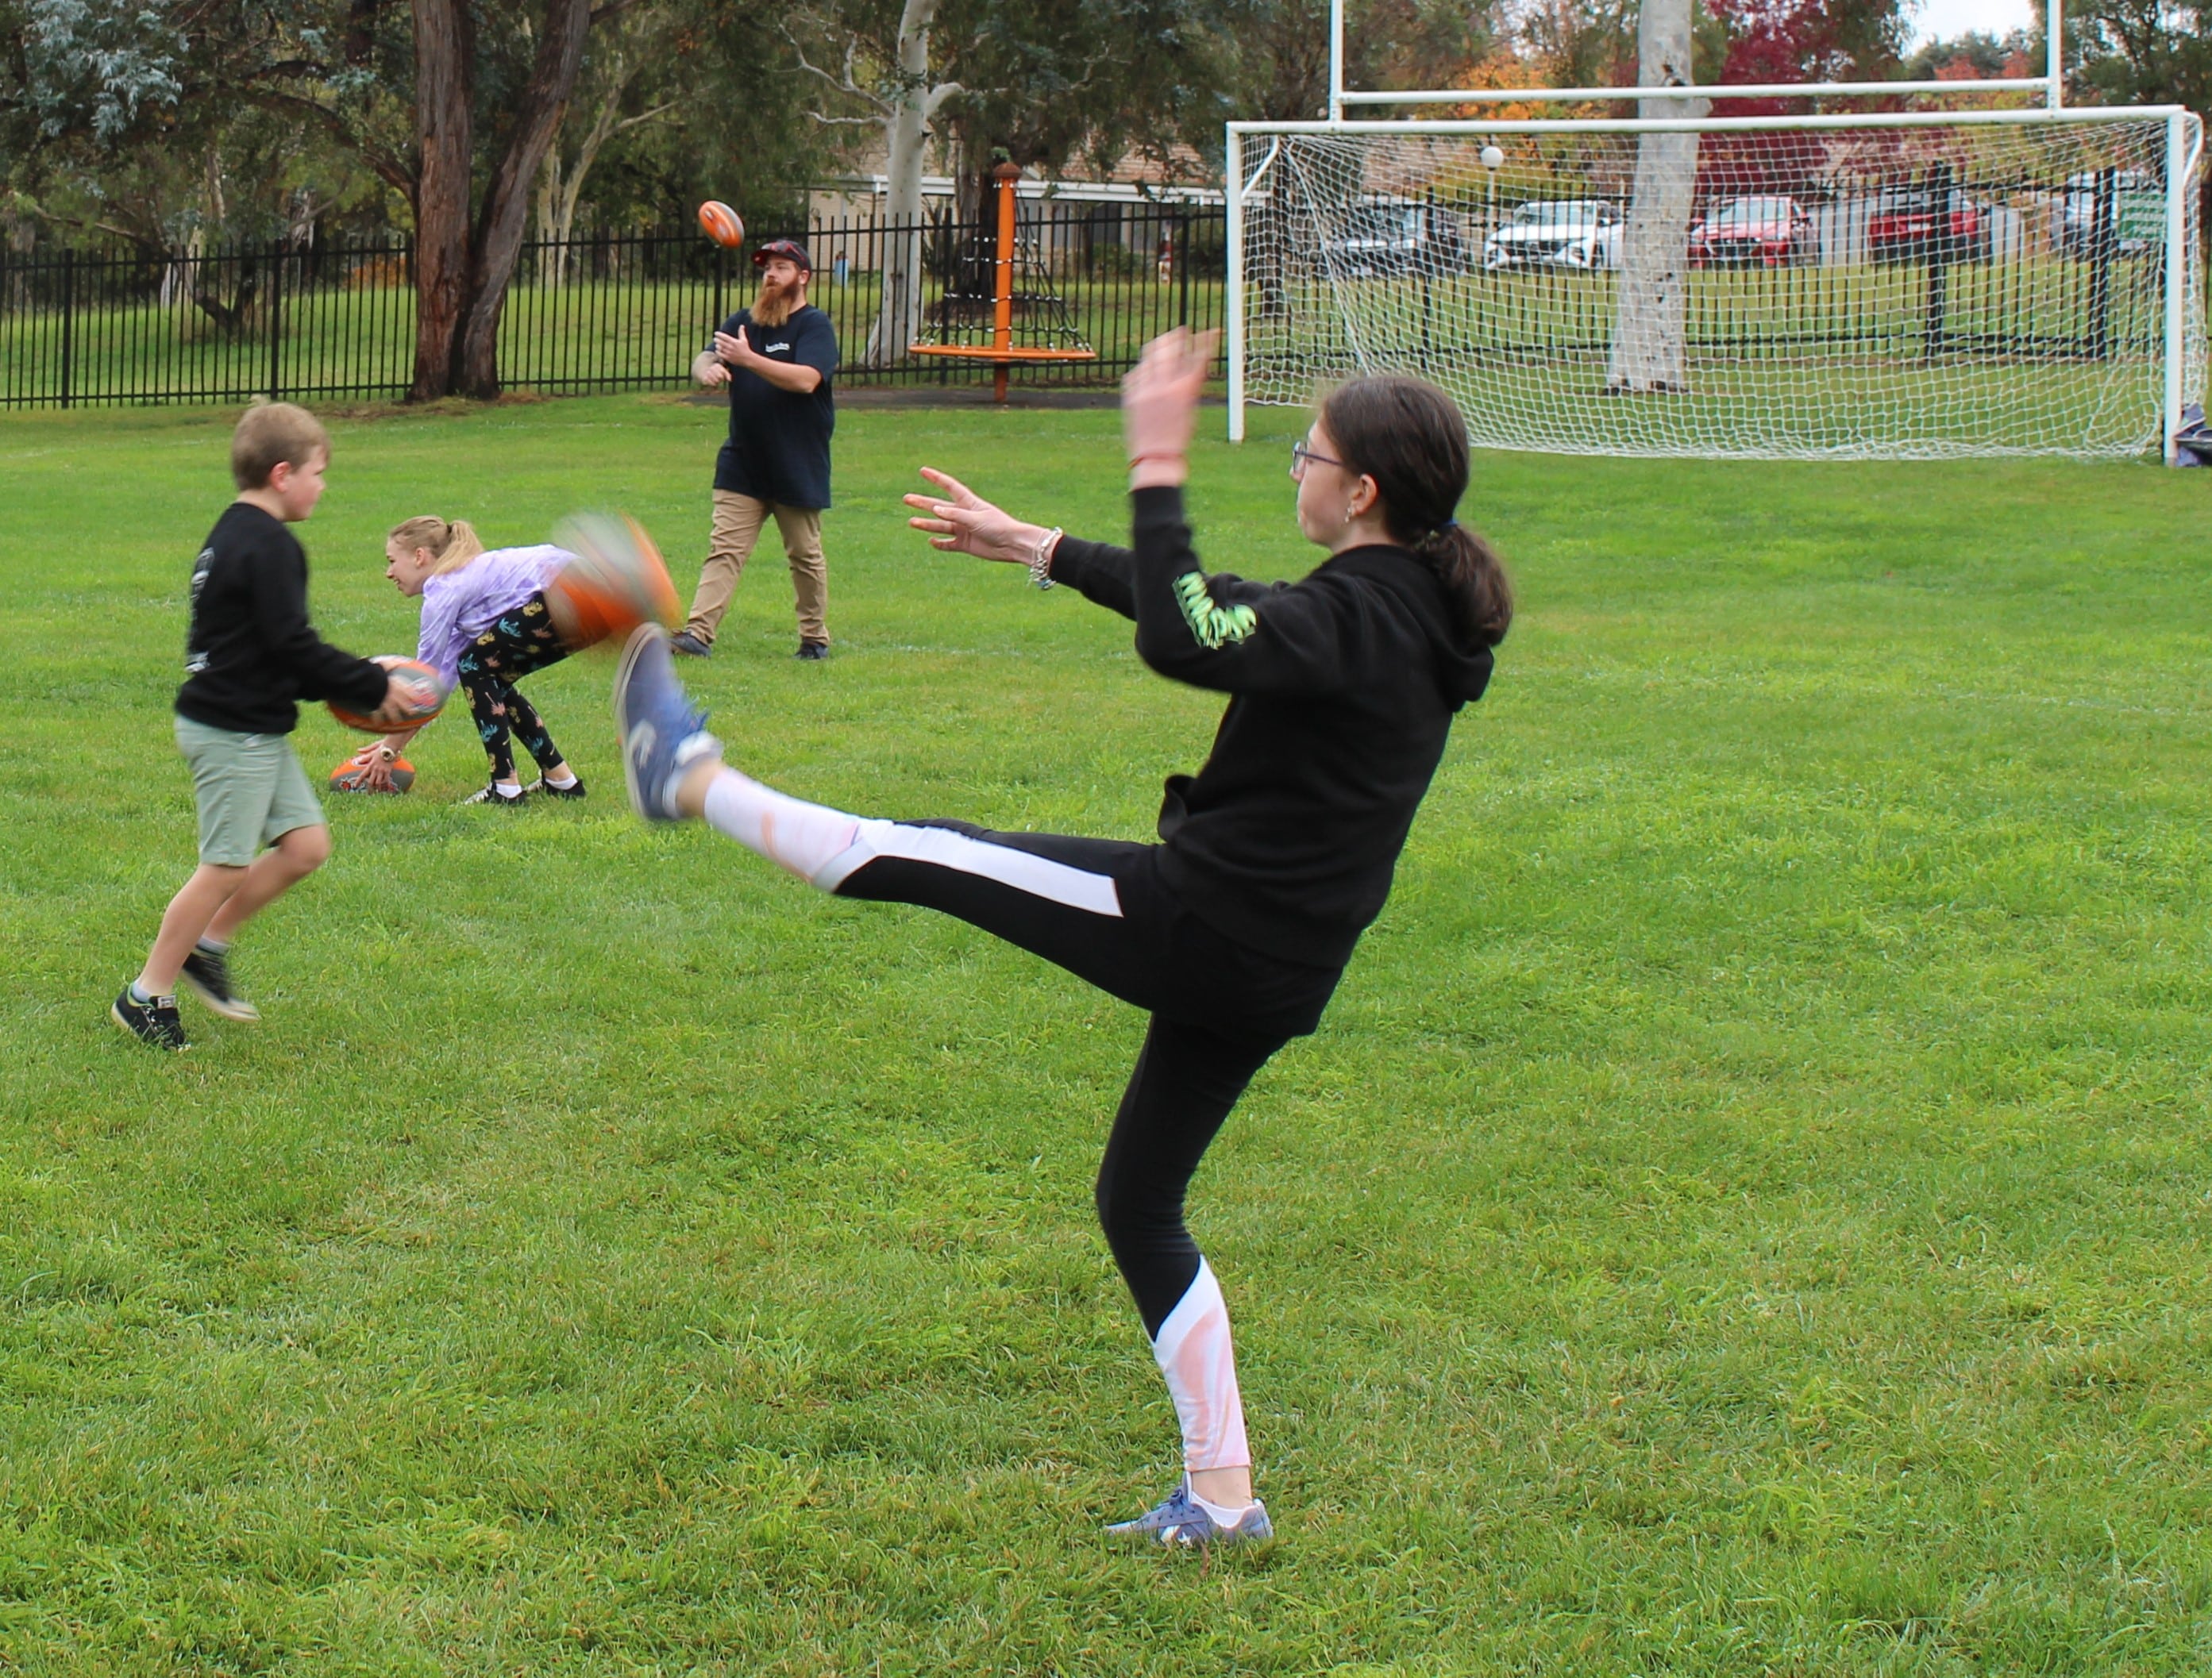 Girl kicking ball on outdoor field with others surrounding her